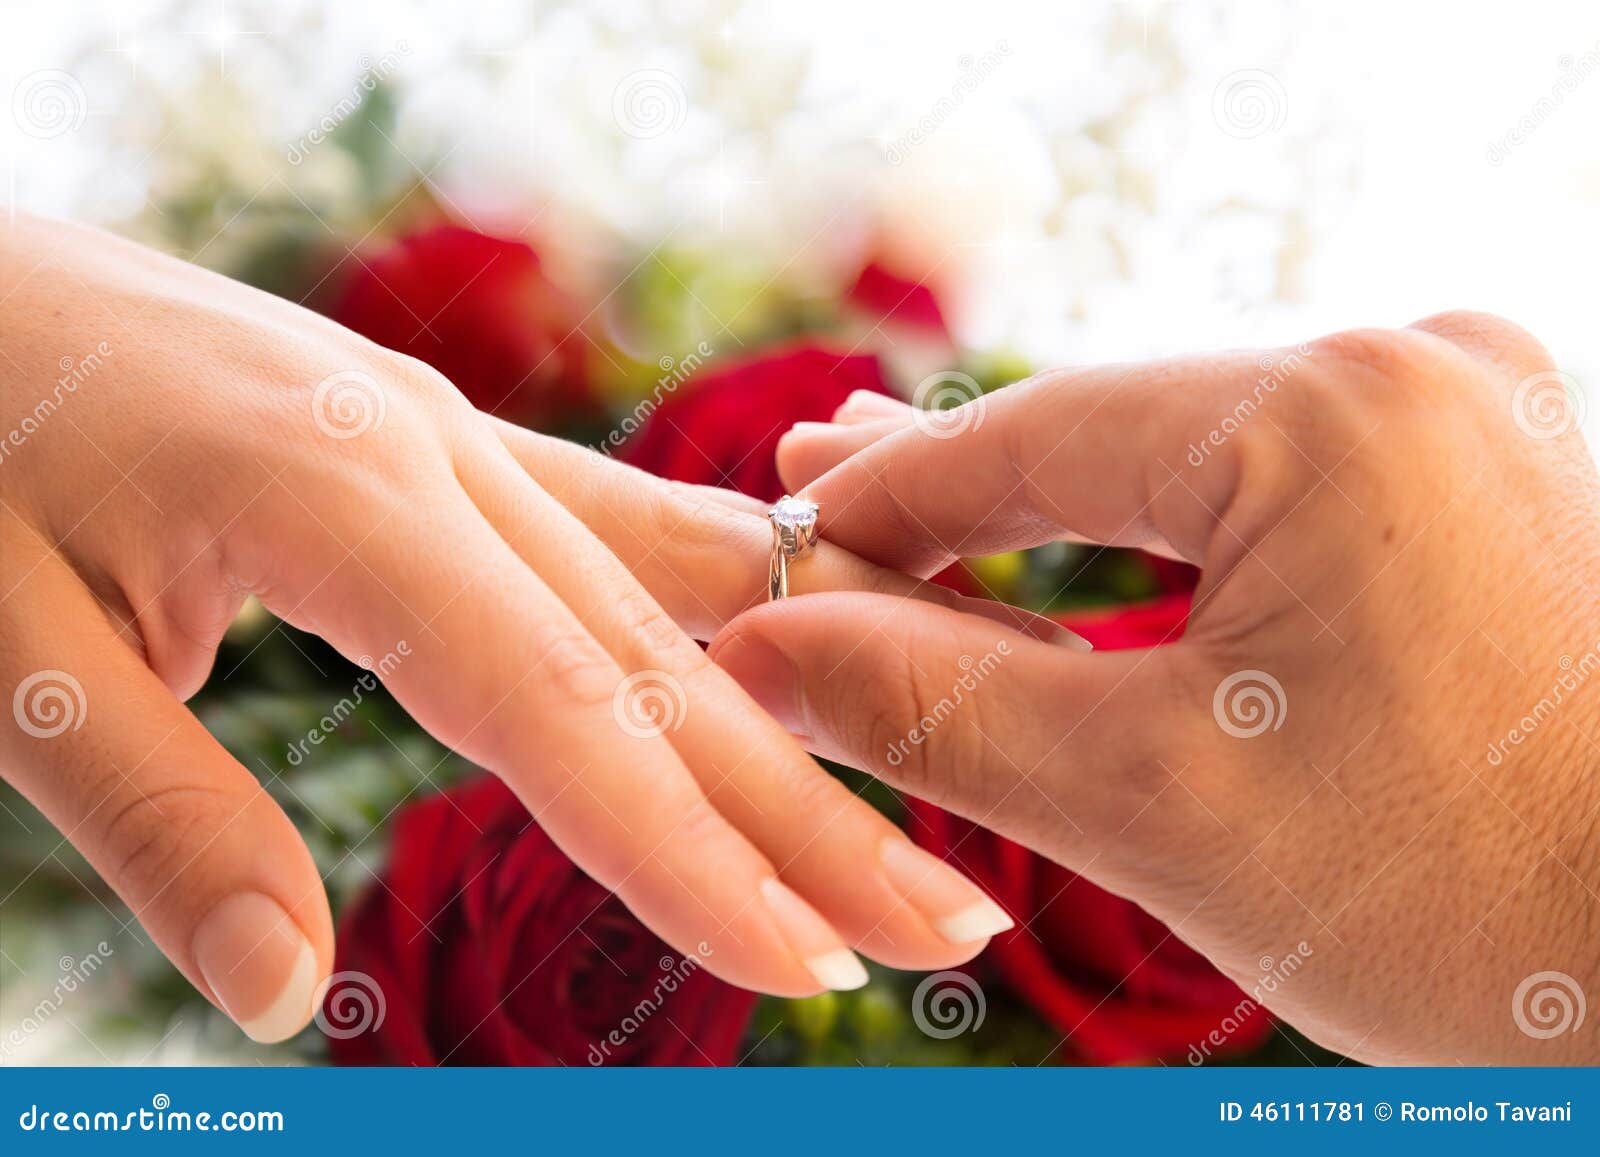 engagement and proposal to wedding